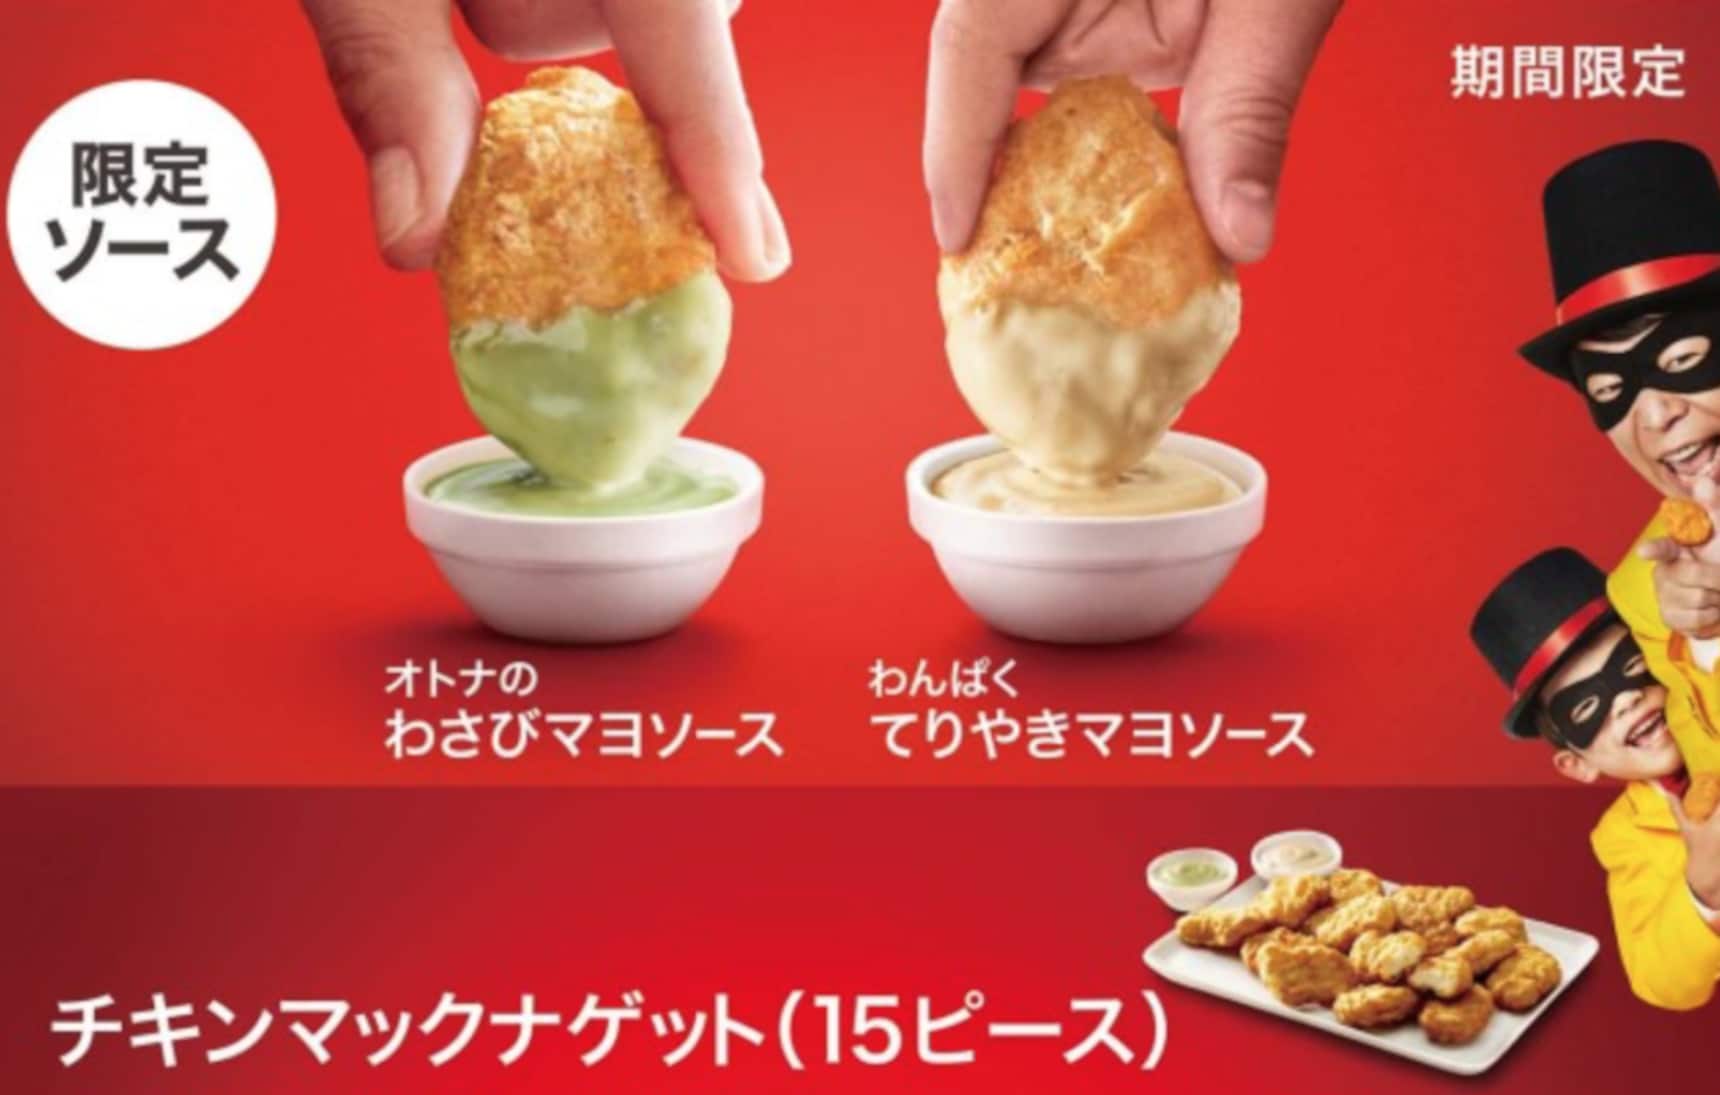 Dip Your McNuggets in Wasabi or Teriyaki Sauce | All About Japan